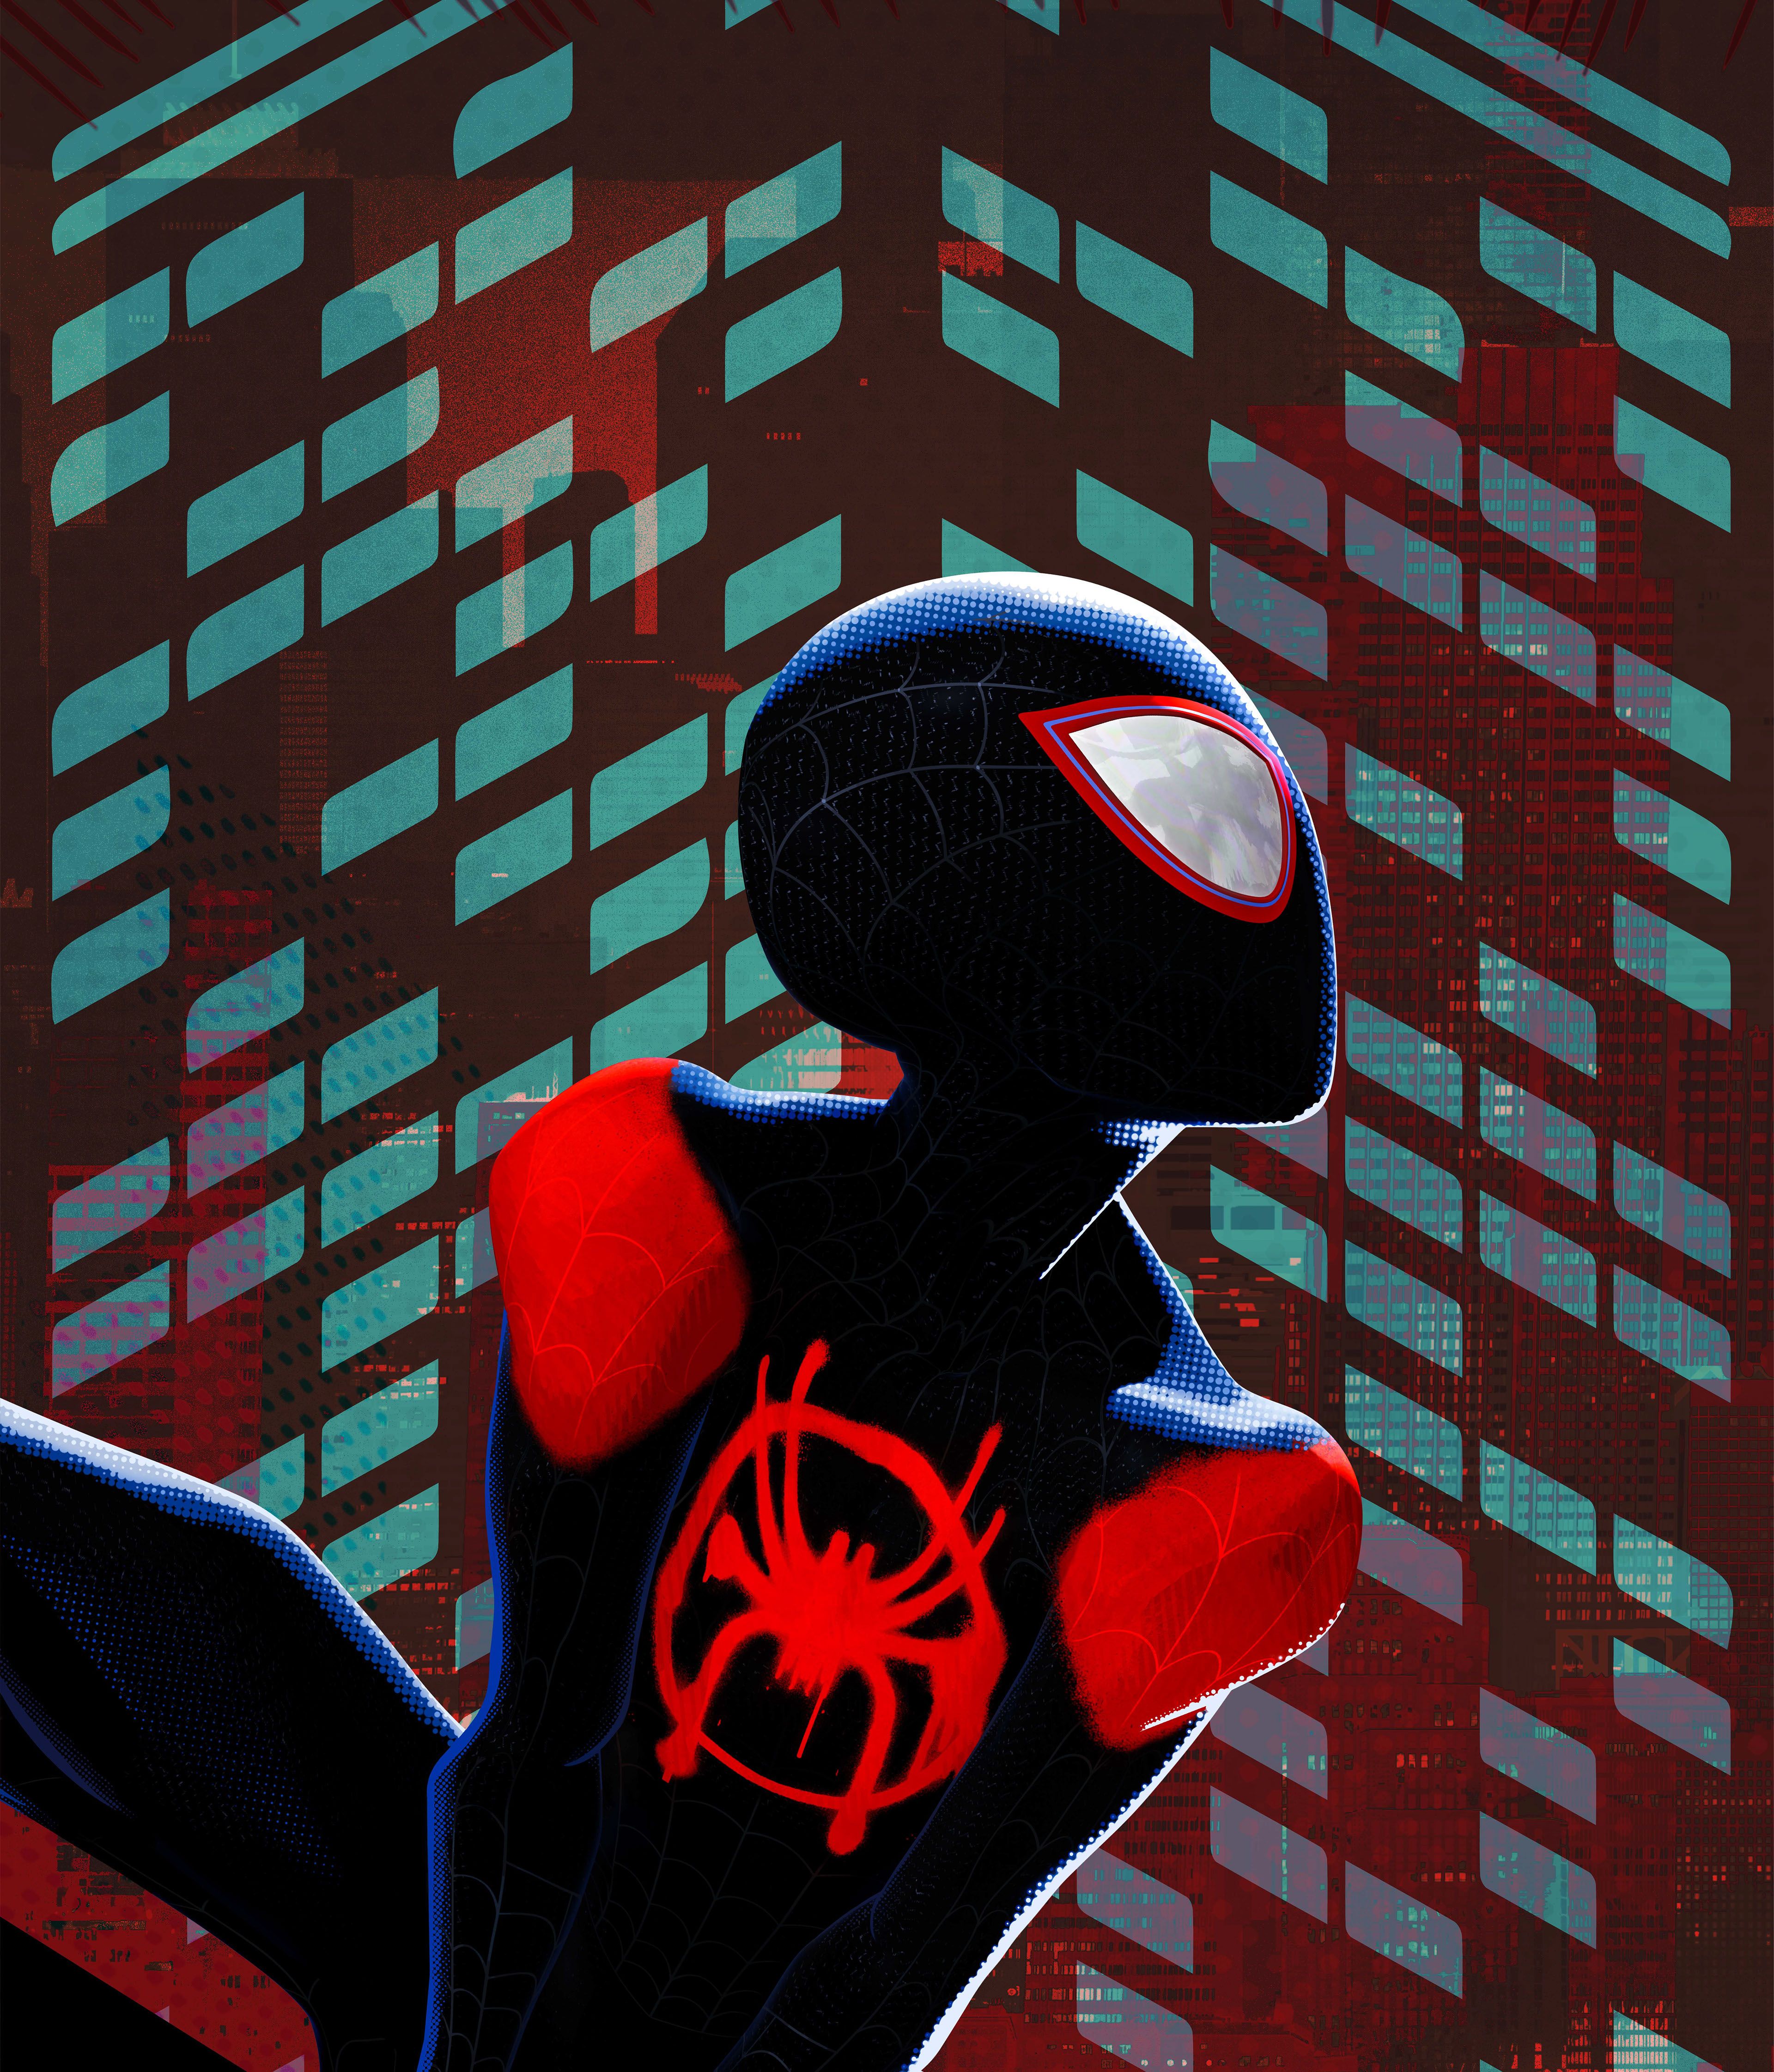 Wallpaper Miles Morales, Spider Man: Into The Spider Verse, 4K, Creative Graphics,. Wallpaper For IPhone, Android, Mobile And Desktop